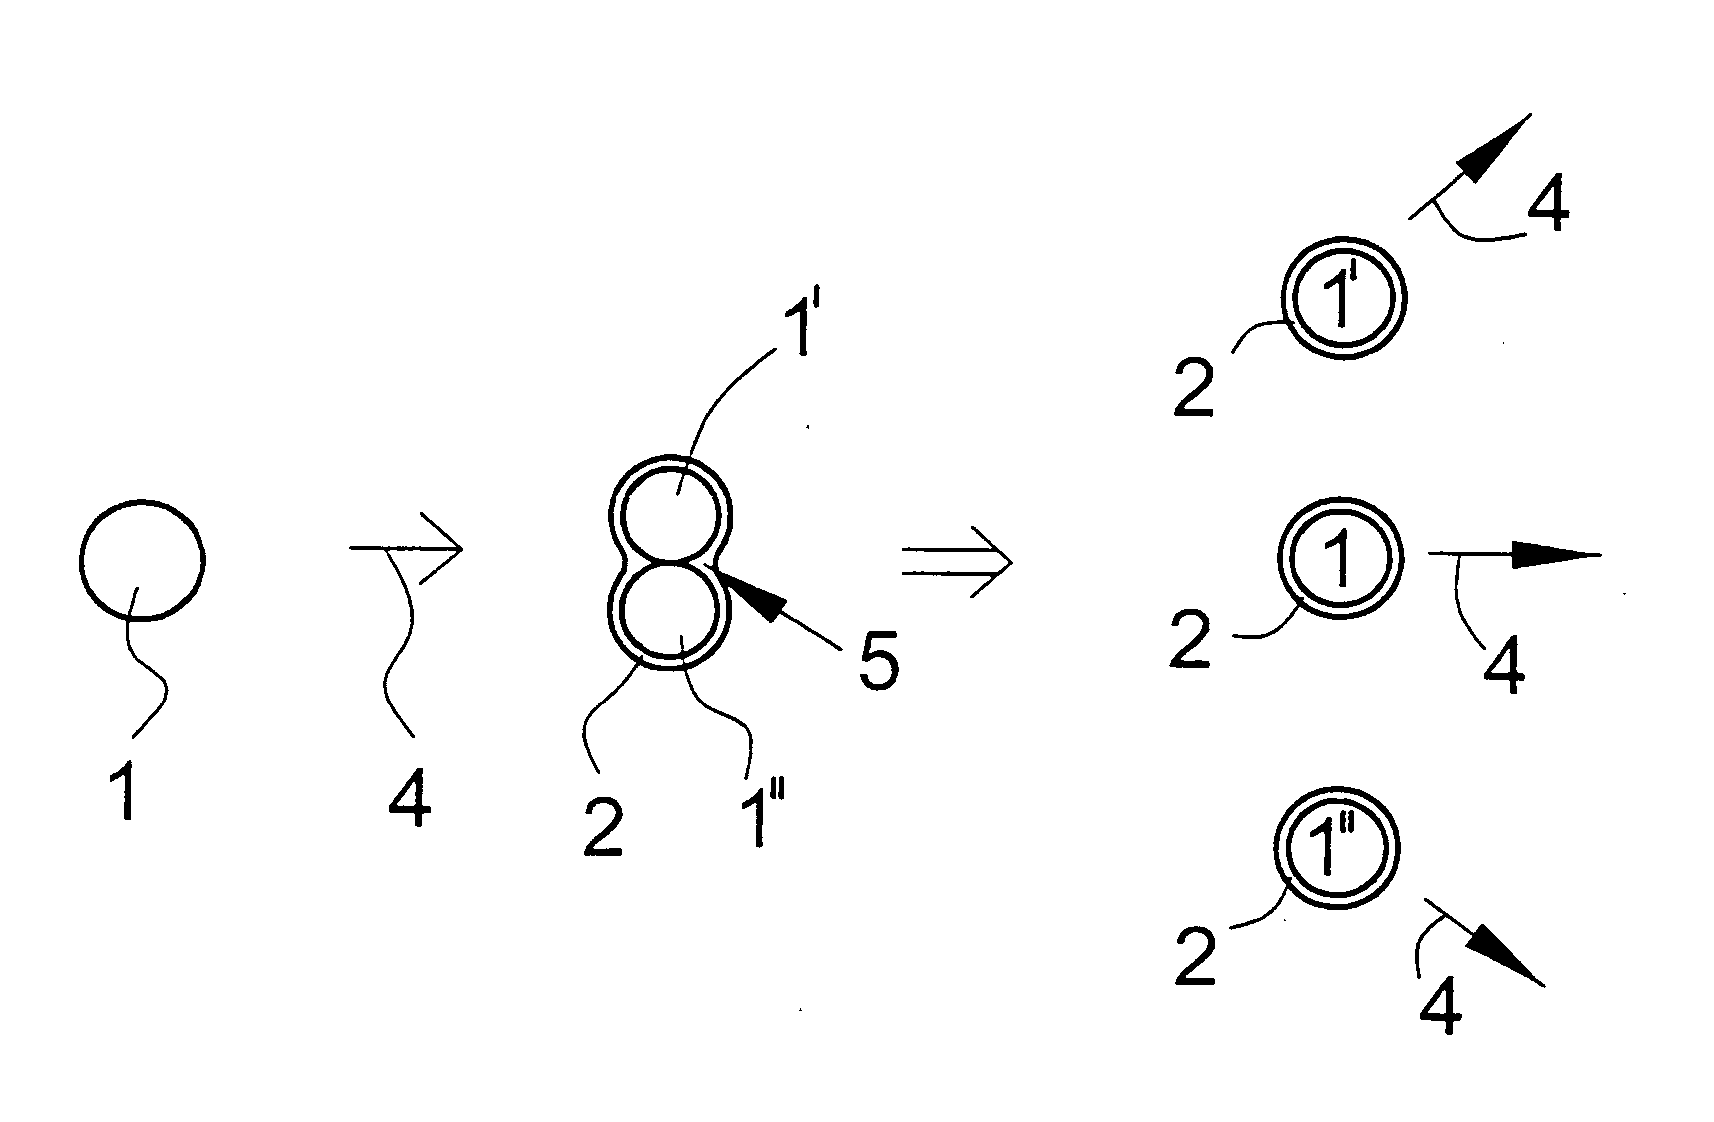 Two-step mixing process for producing an absorbent polymer